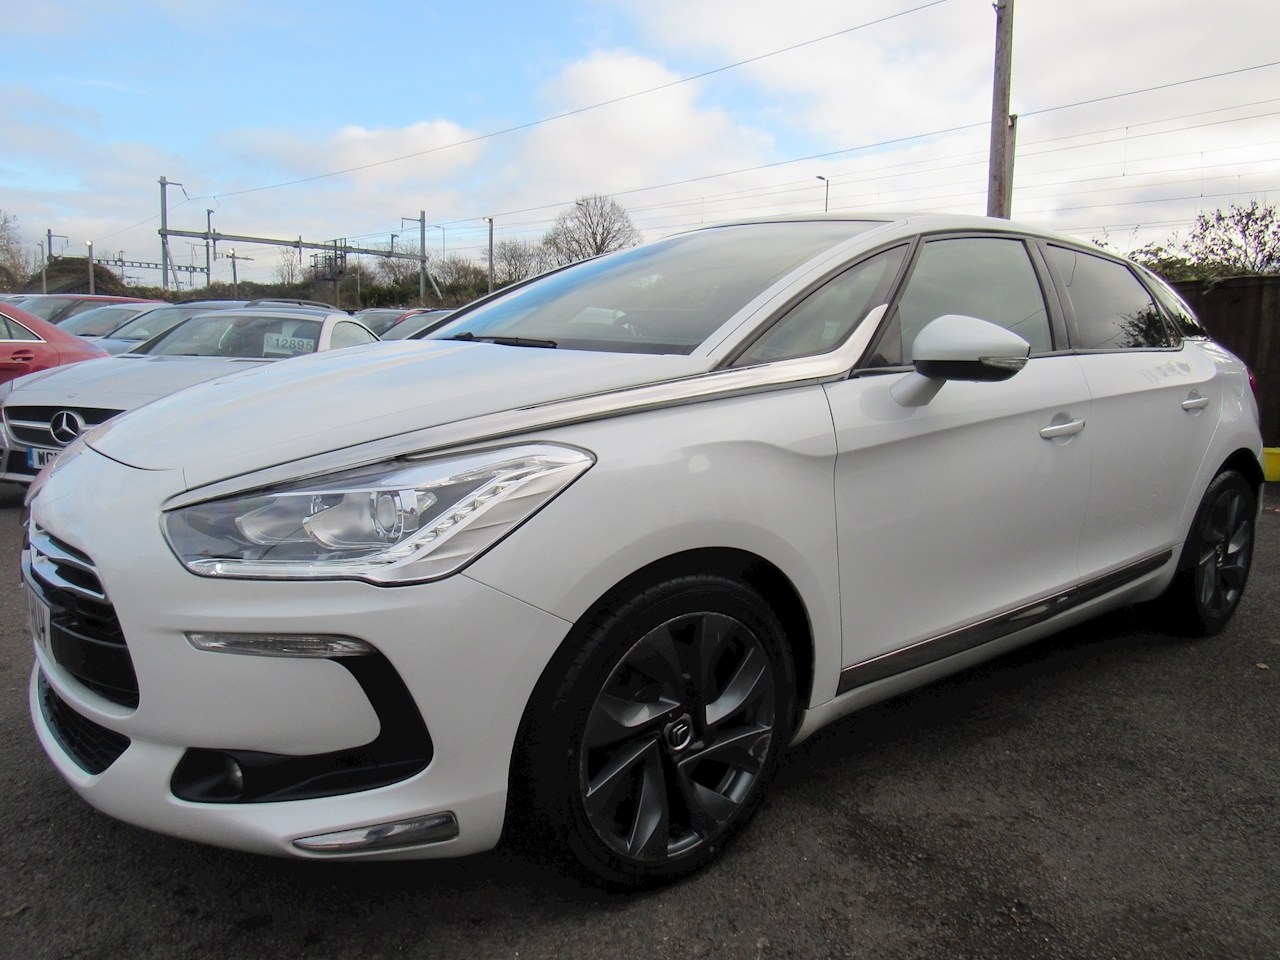 Ds5 Hdi Dstyle Hatchback 2.0 Manual Diesel